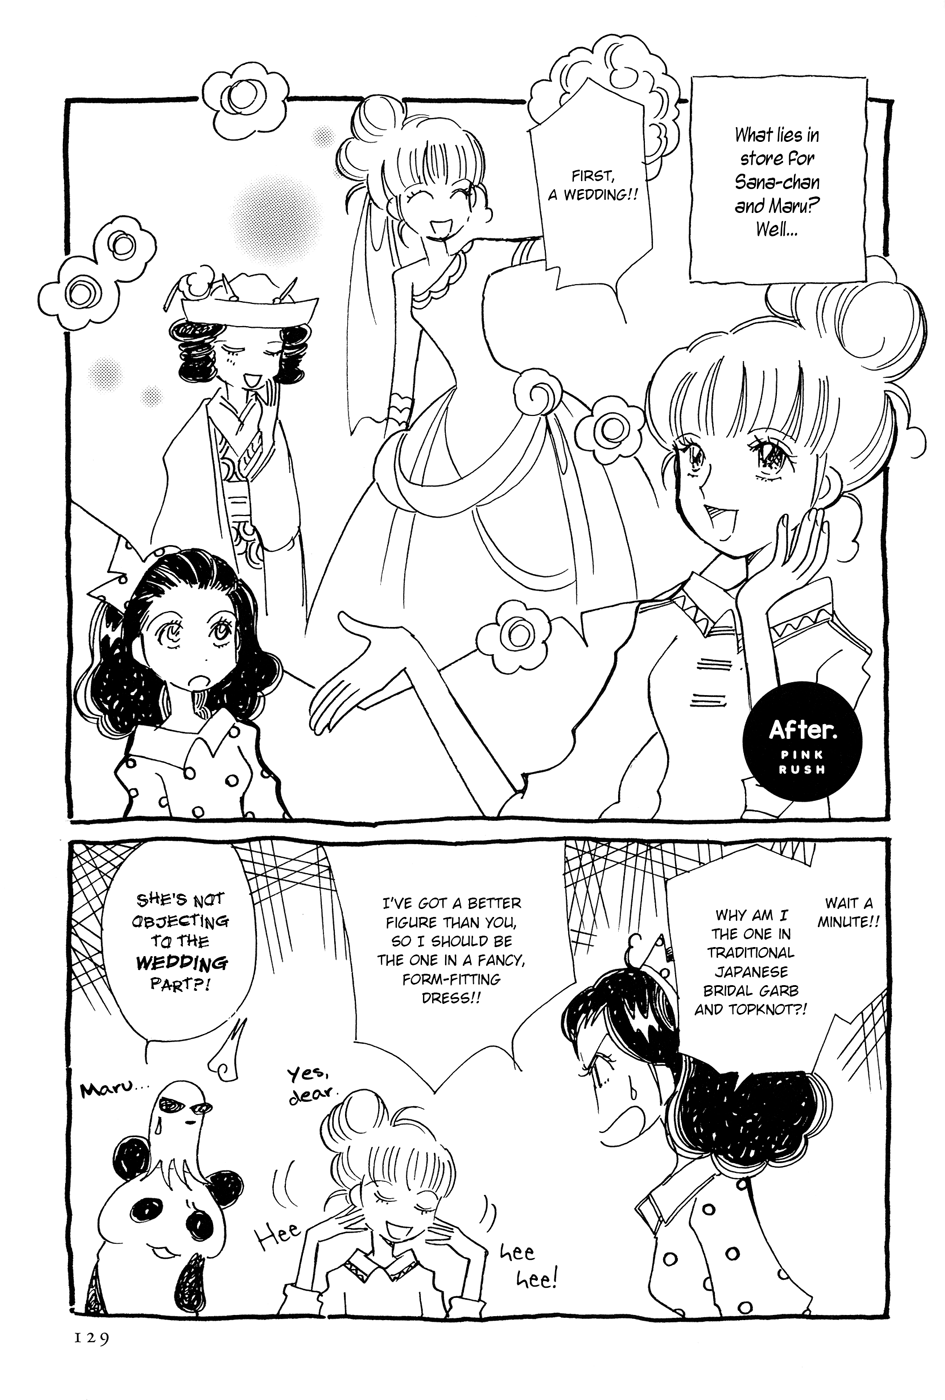 Pink Rush - Page 1